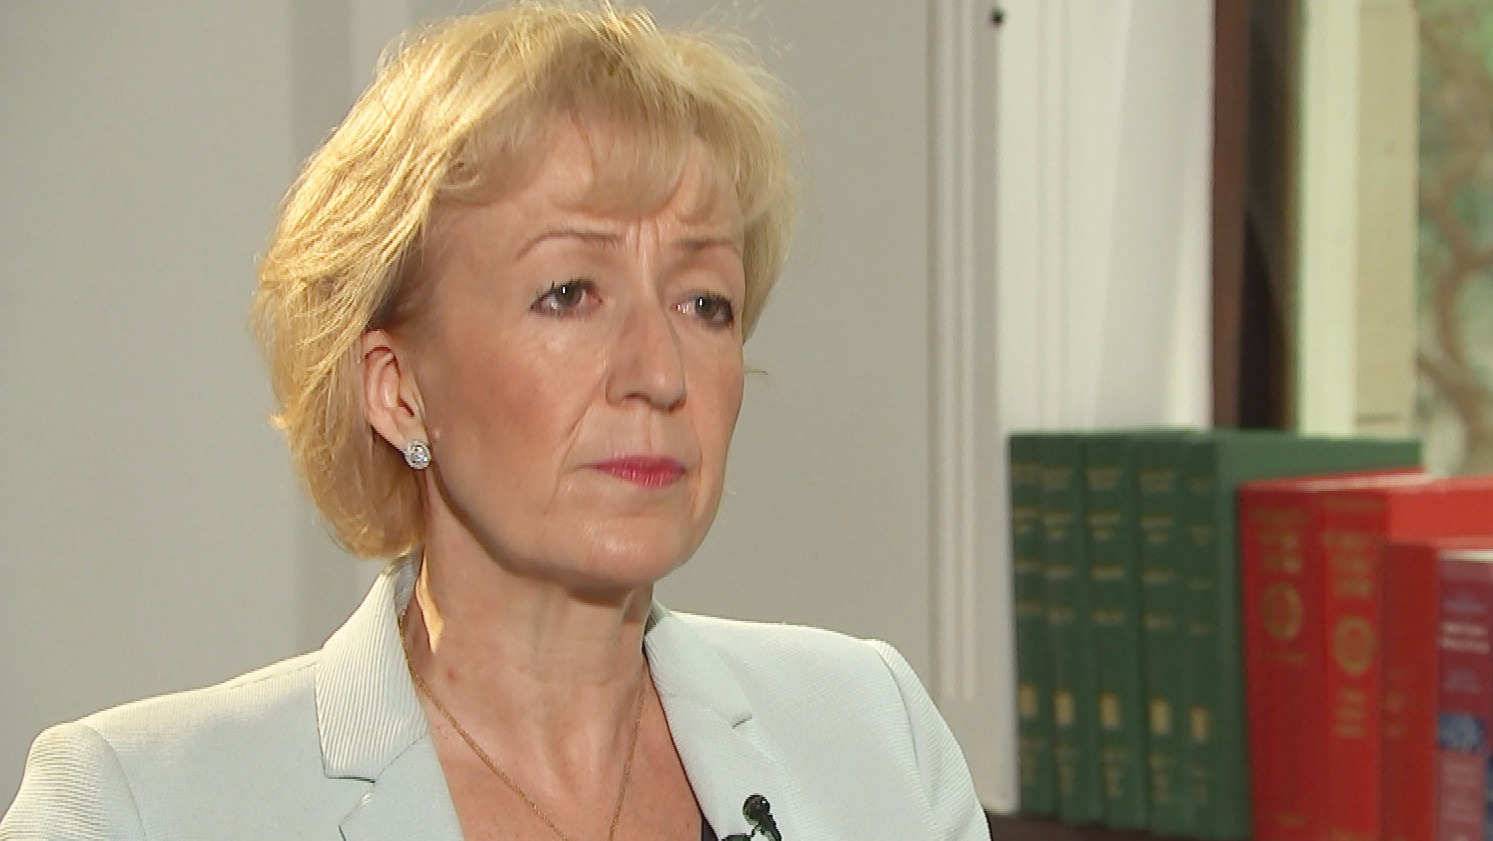 Andrea Leadsom Tells Itv News Her Views On Gay Marriage Fox Hunting Hs2 Heathrow And Going To